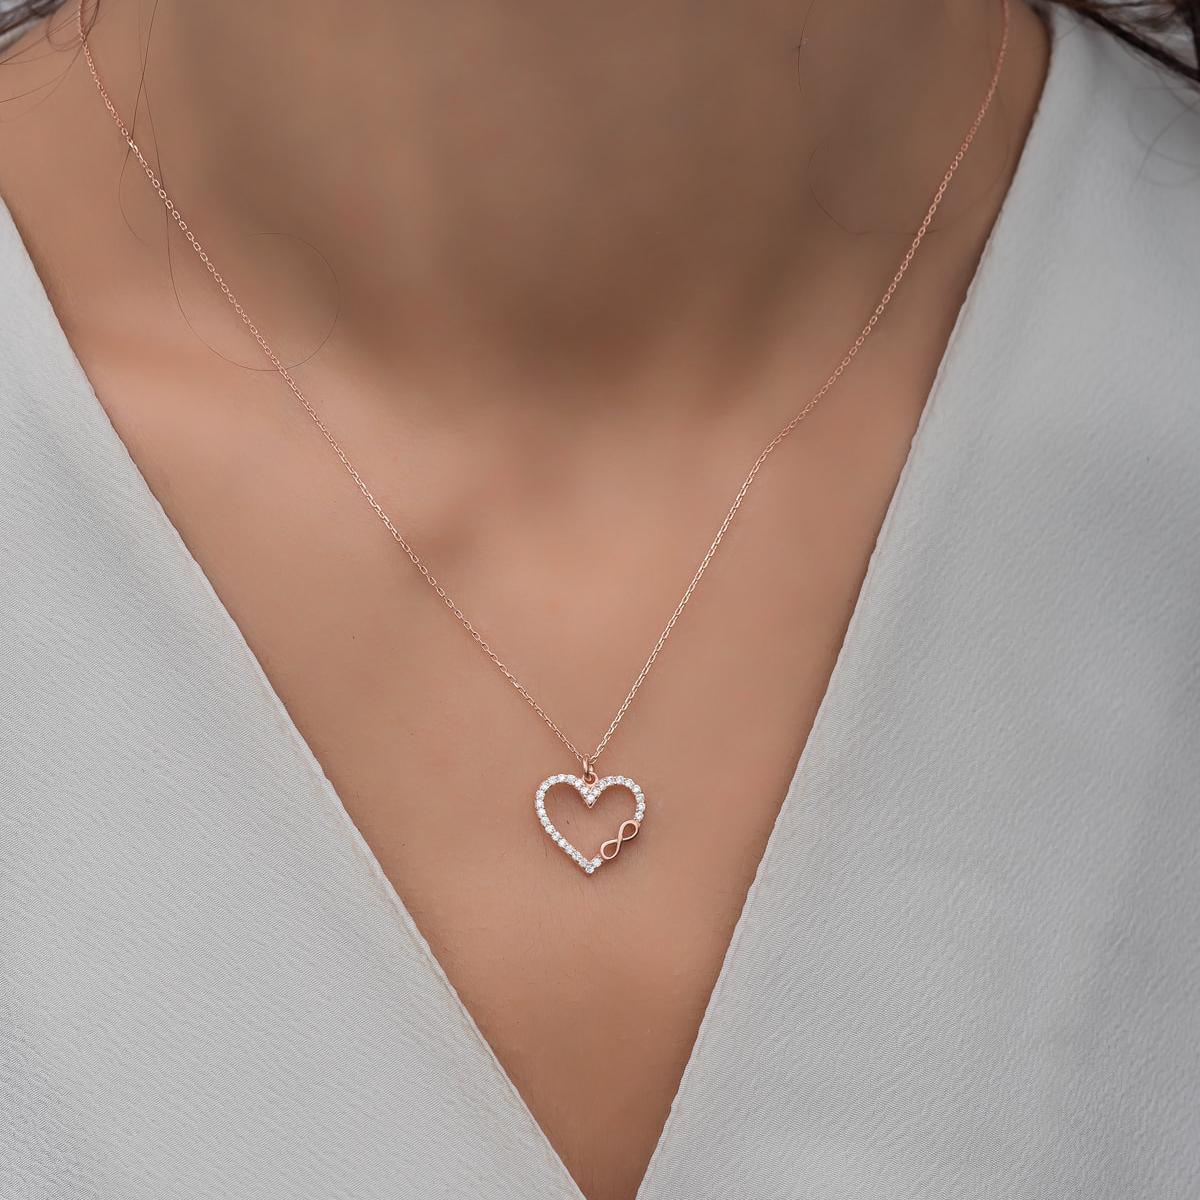 Rose Gold Tiny Infinity Necklace • Infinity Symbol Heart Necklace - Trending Silver Gifts